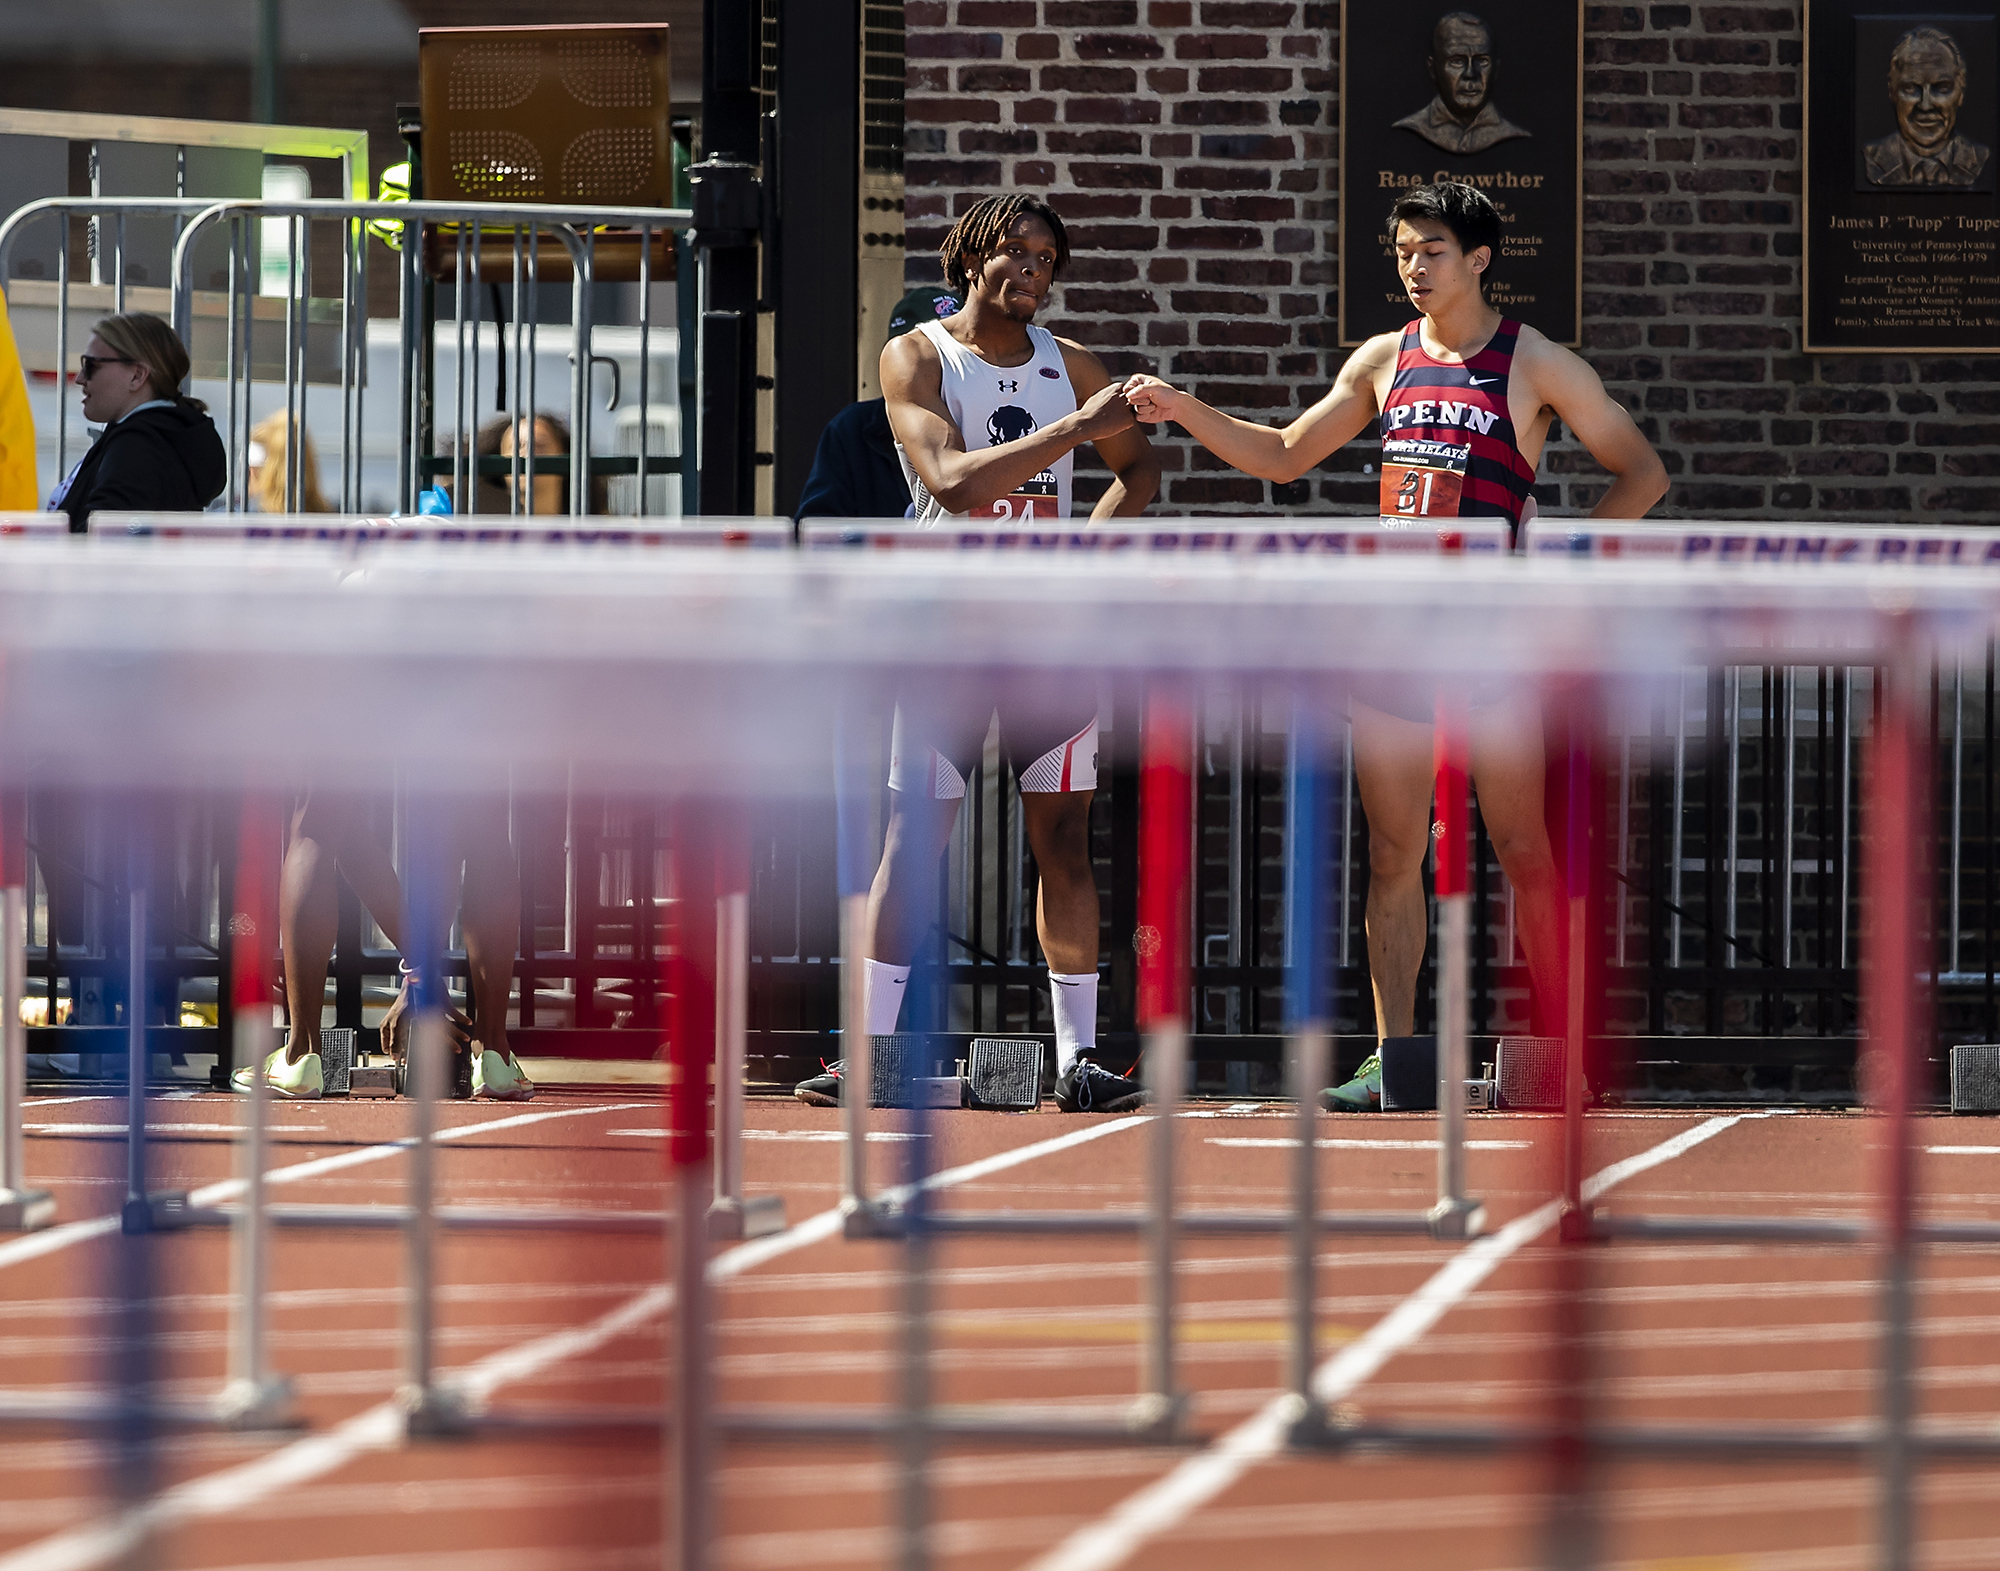 Two runners in front of hurdles on a track give each other a fist bump.